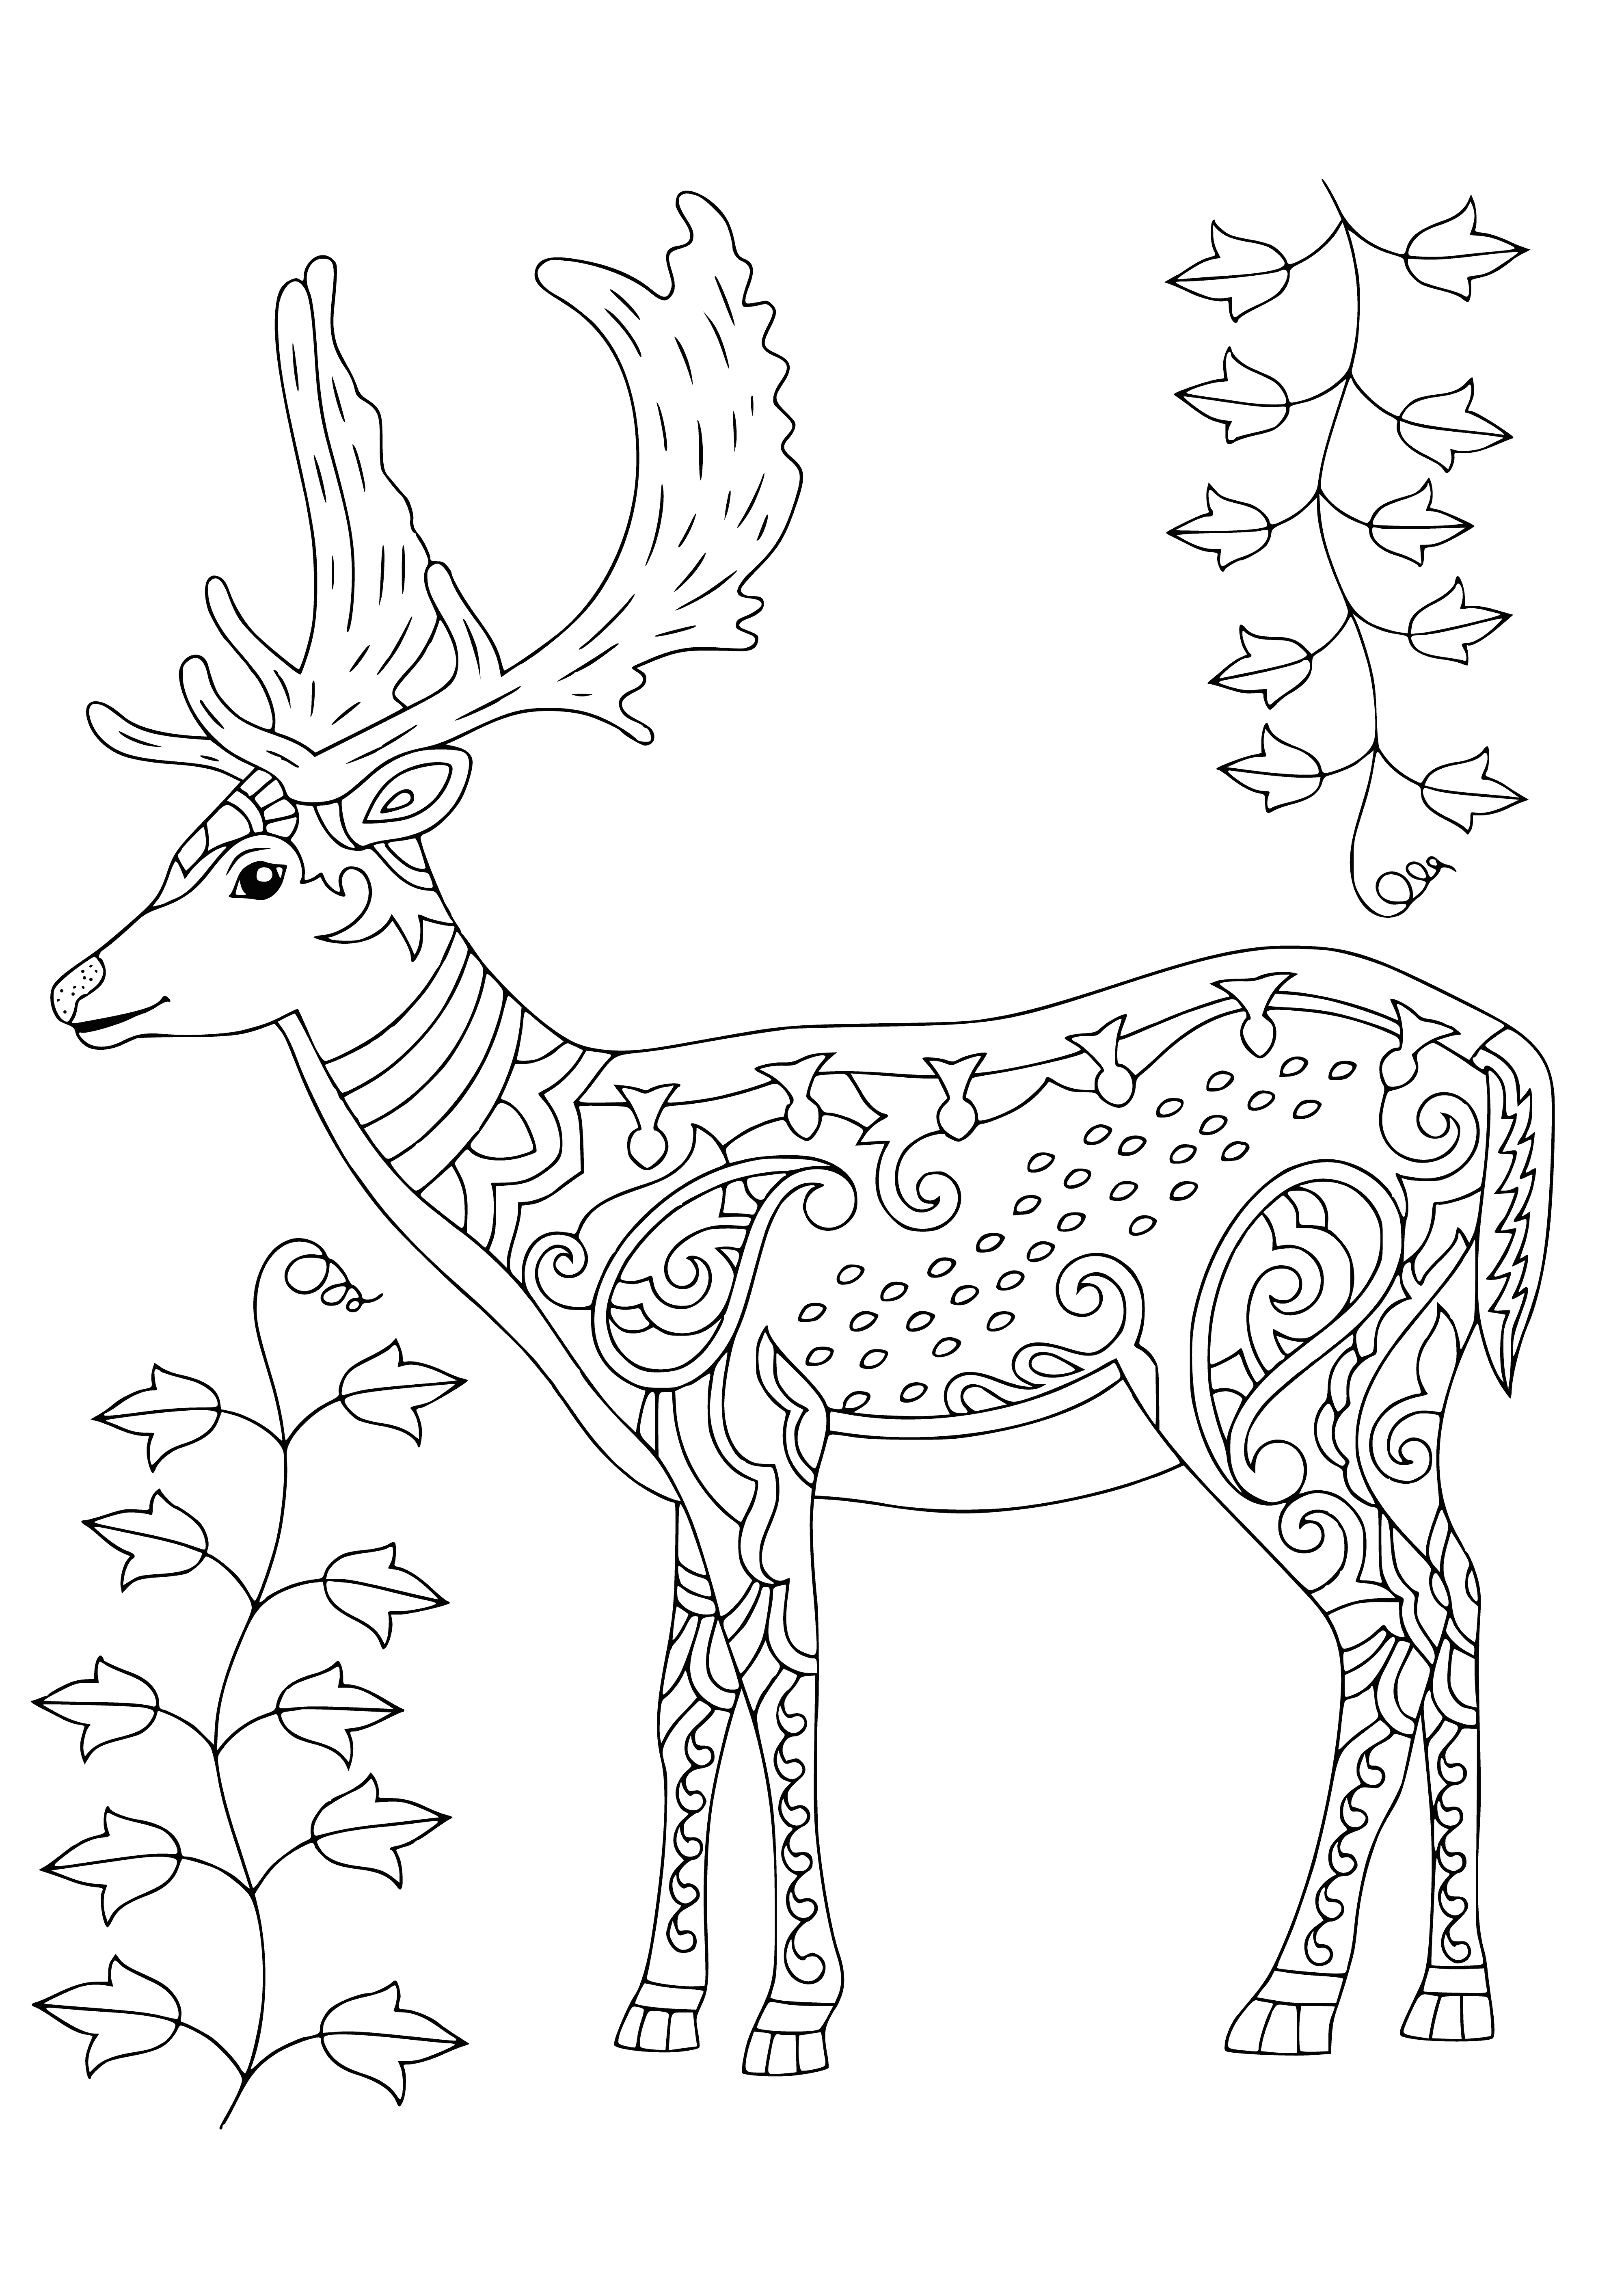 coloring page: A brown deer with a white tail looks at the viewer in a green field.